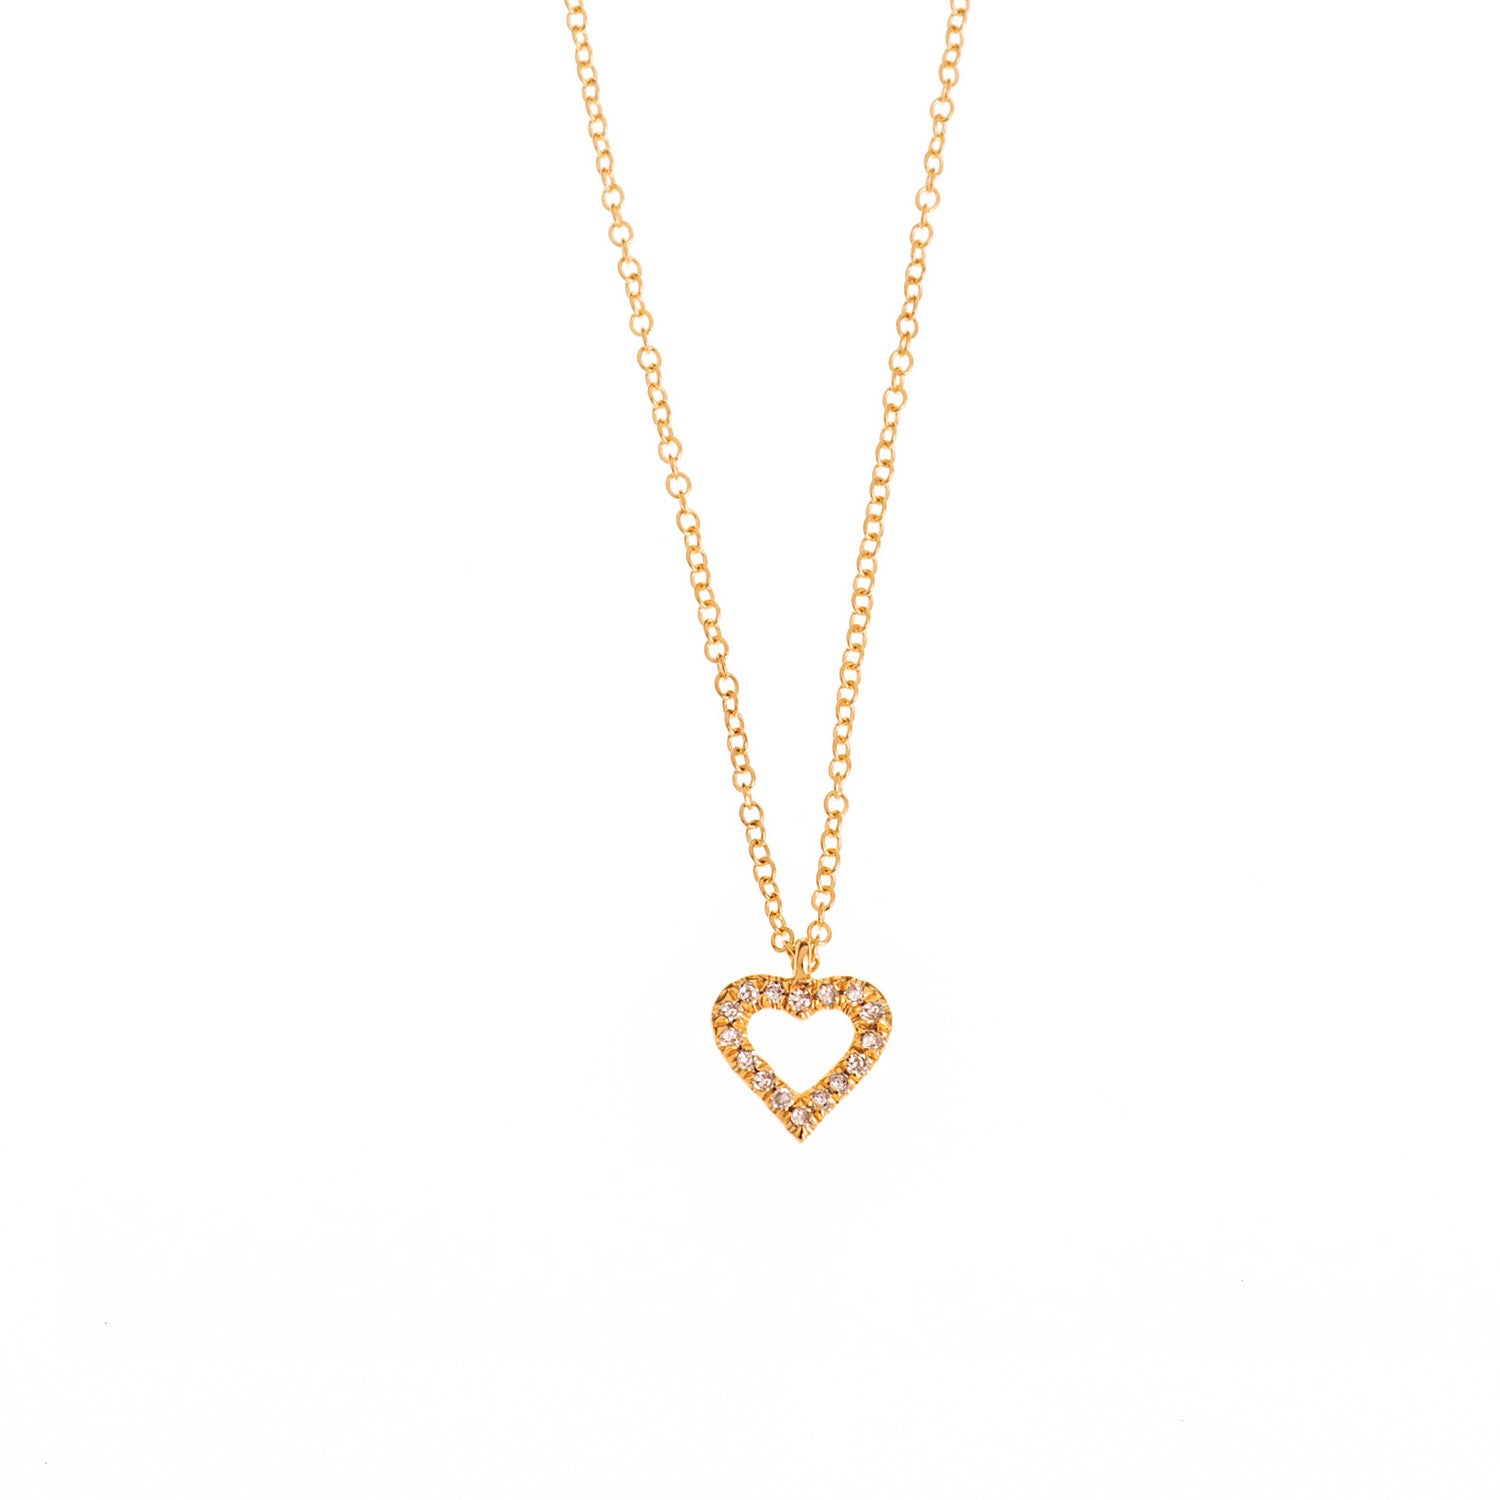 Diamond Necklace. Heart Necklace. Necklace Gift. Charm Gift. 18K gold necklace. 14K Gold necklace. Sapphire necklace. Ruby necklace. White gold necklace. Rose Gold necklace. Yellow gold. Diamond heart. Chain Necklace. Anatol Jewelry. Fine Jewelry. Golden Hall. Kifissia. Athens.